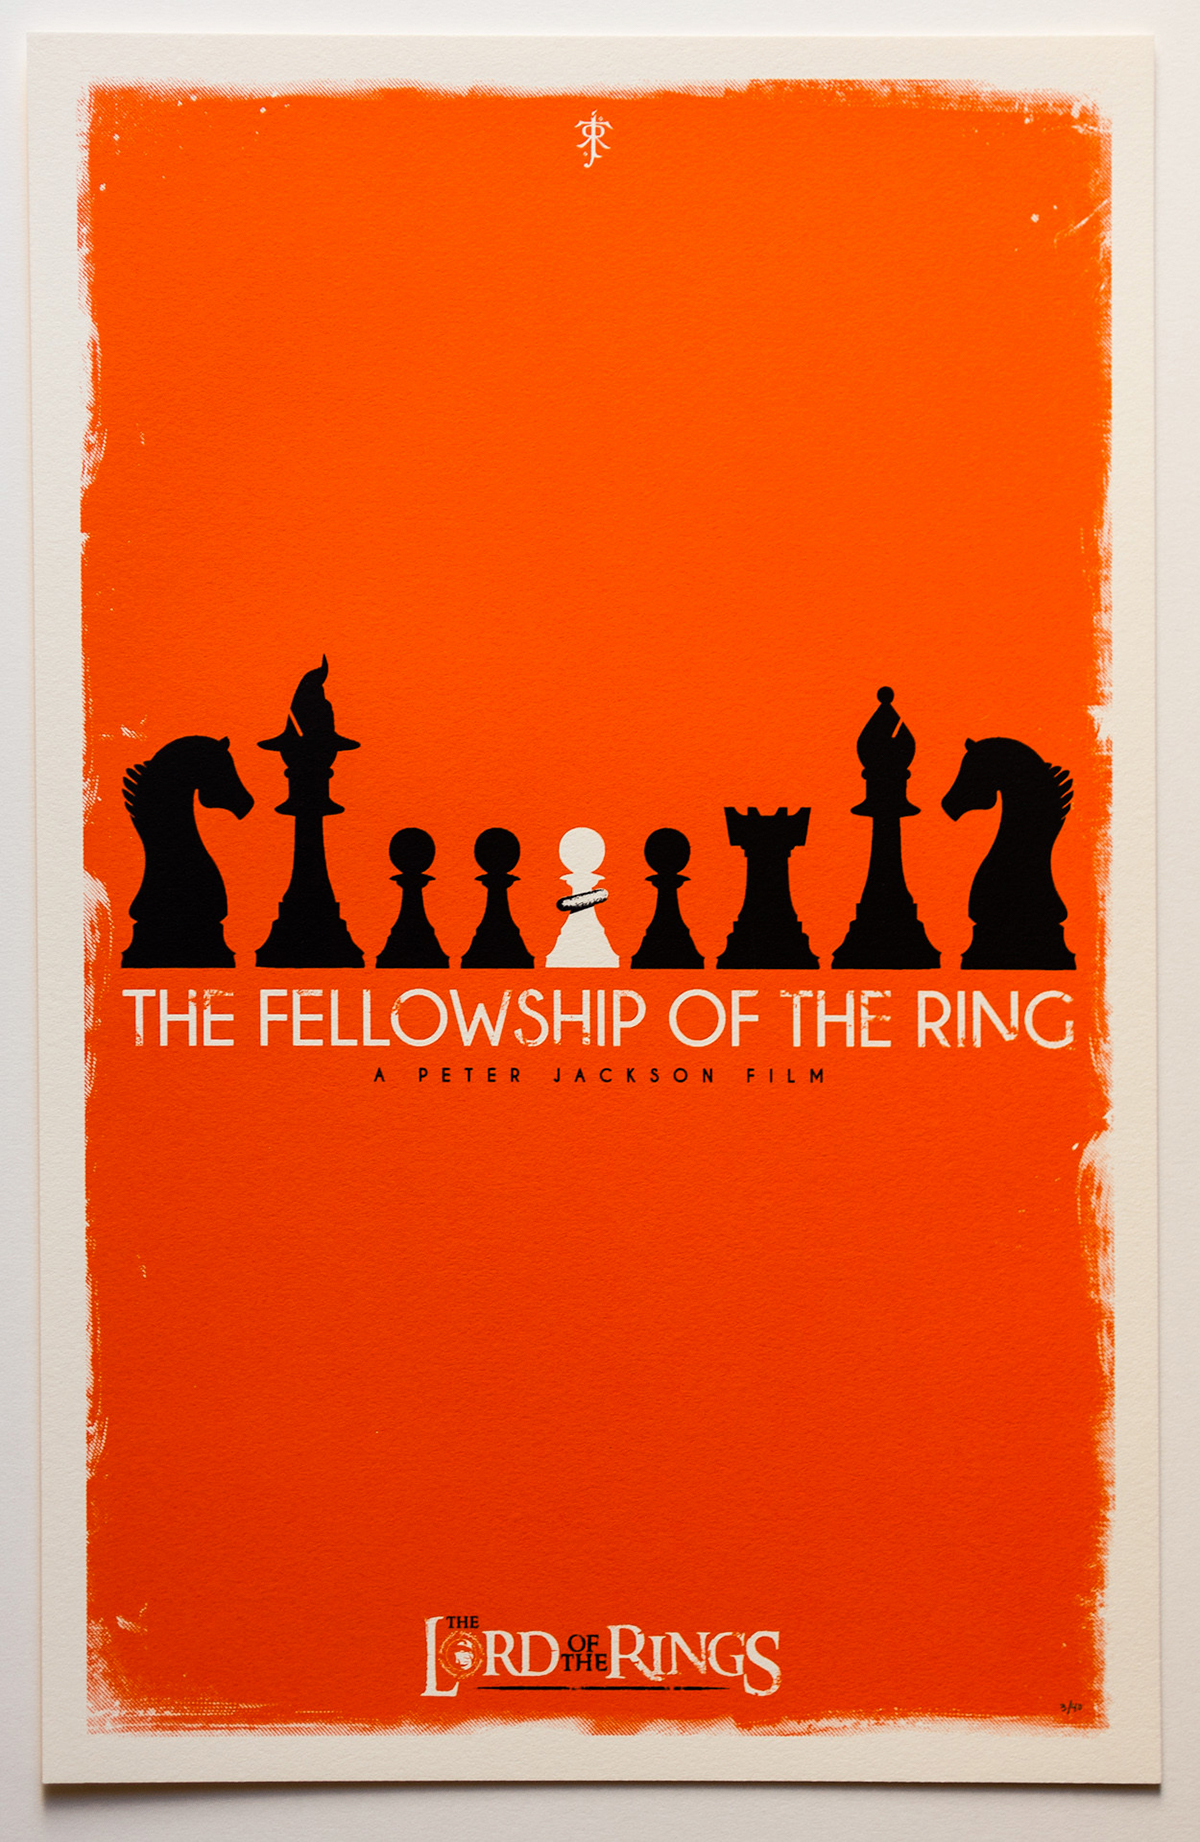 LOTR lord rings Tolkien Peter Jackson hobbit chess elf Aragorn two towers Nazgul middle earth gandalf bilbo frodo